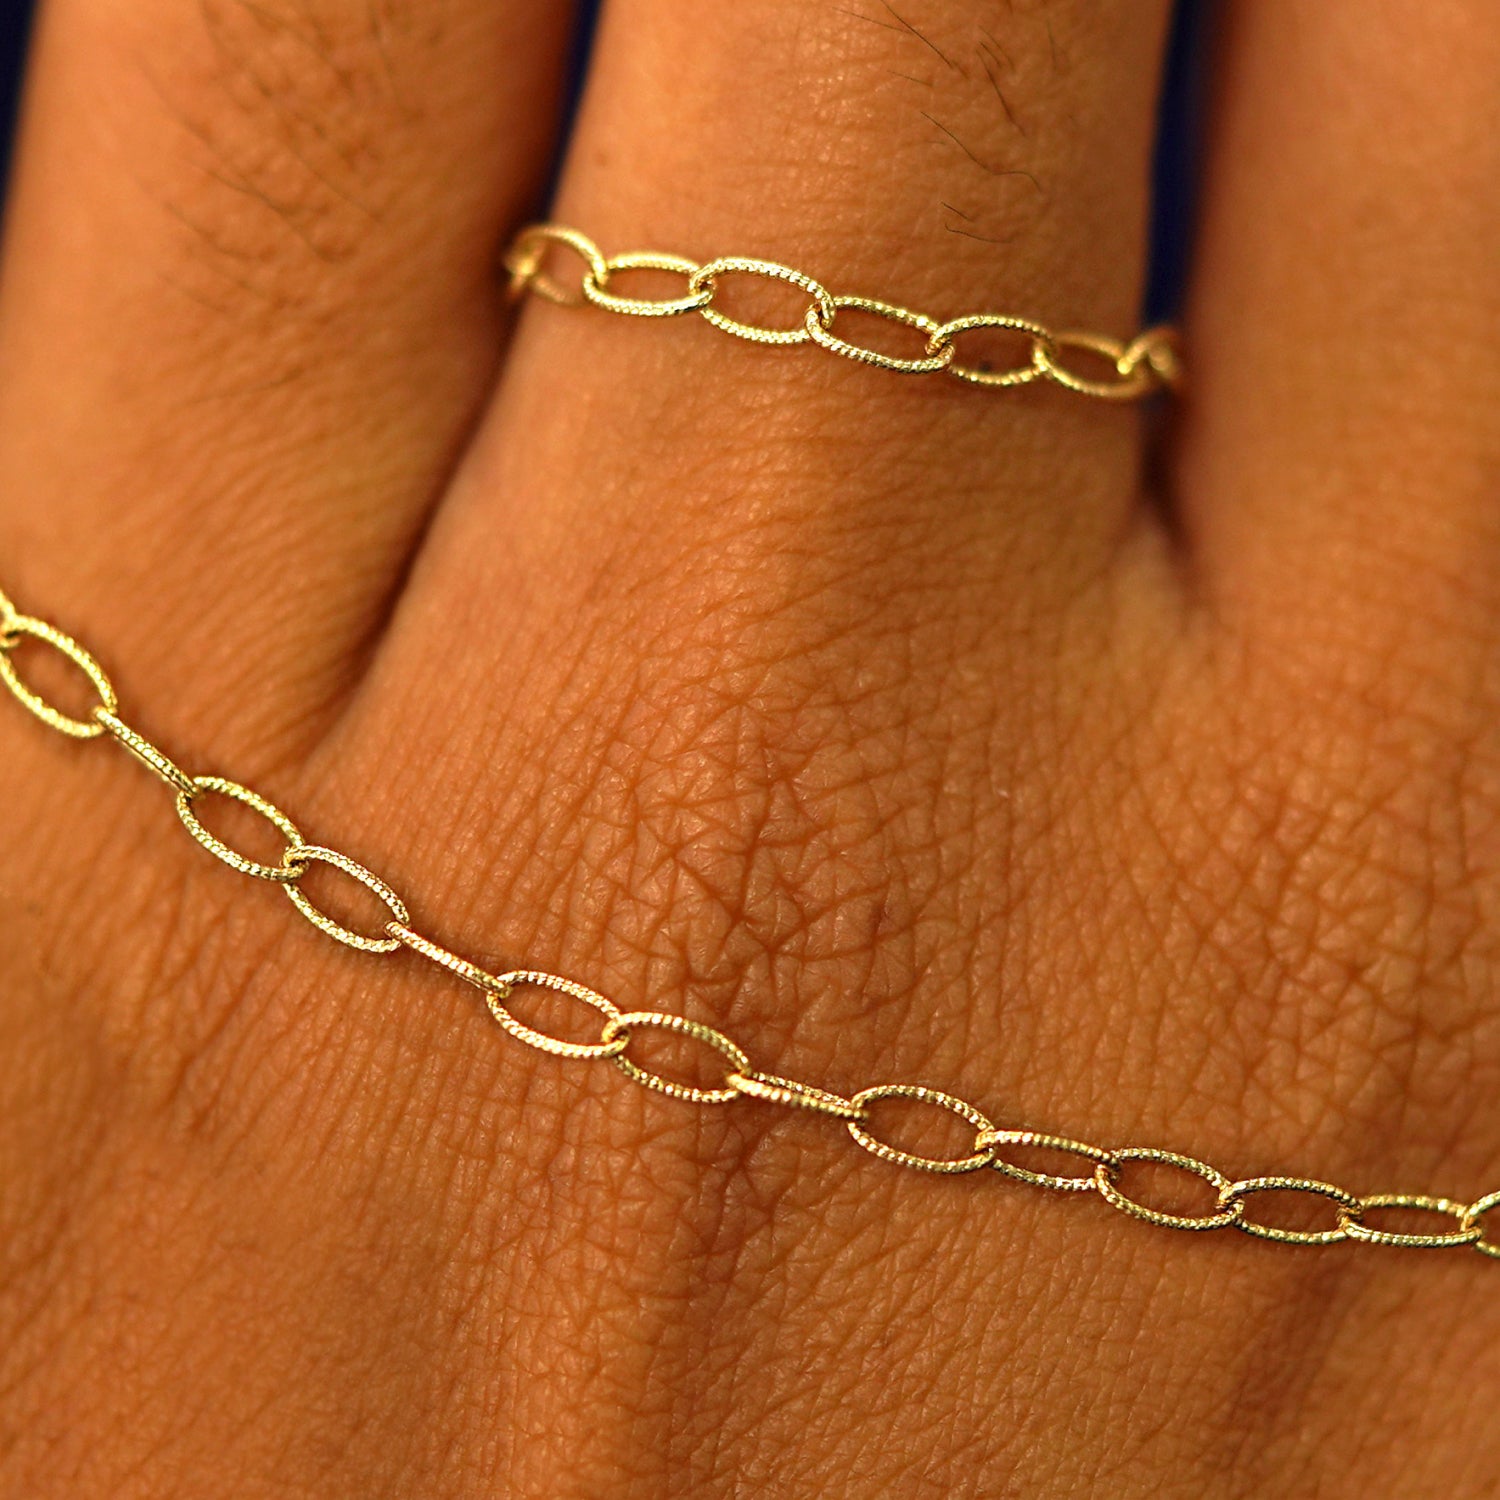 Close up view of a model's hand wearing a solid yellow gold Veren Ring and holding a Veren Bracelet